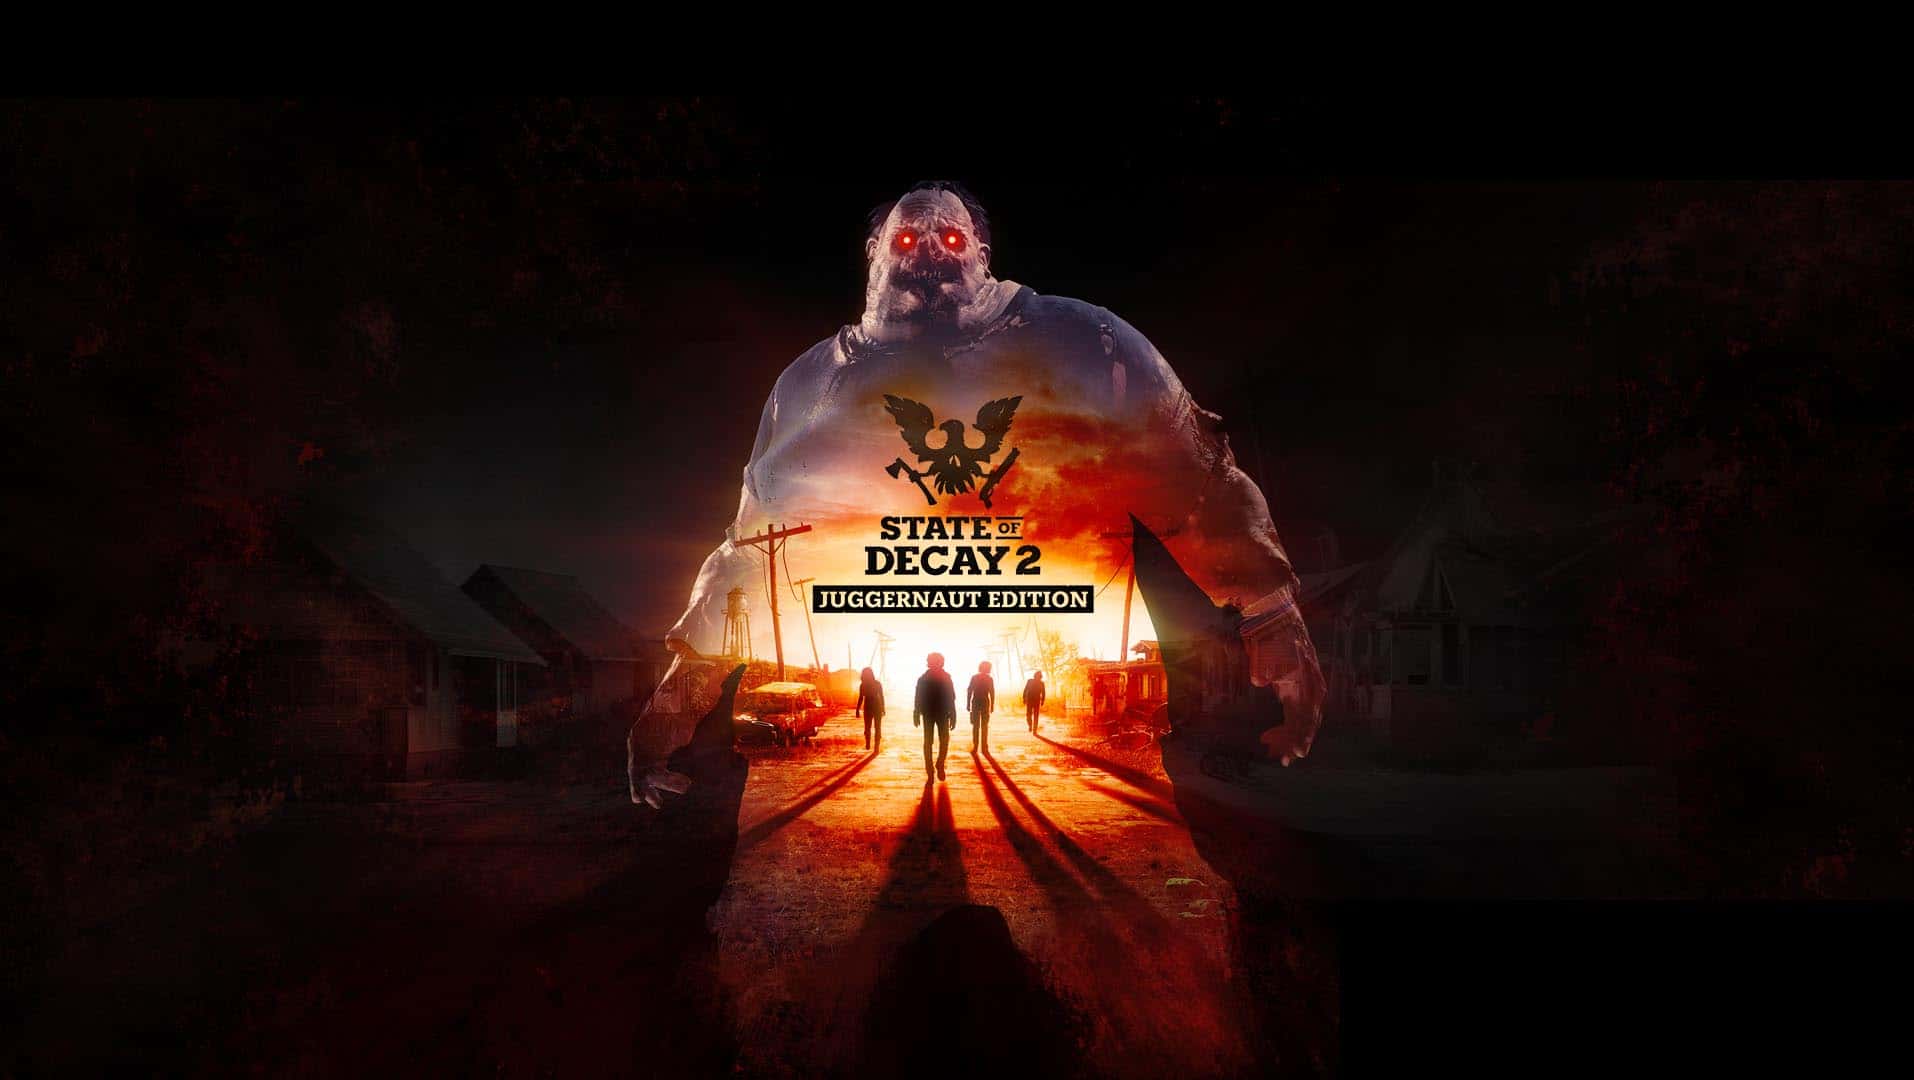 state of decay 2 trainer july 2019